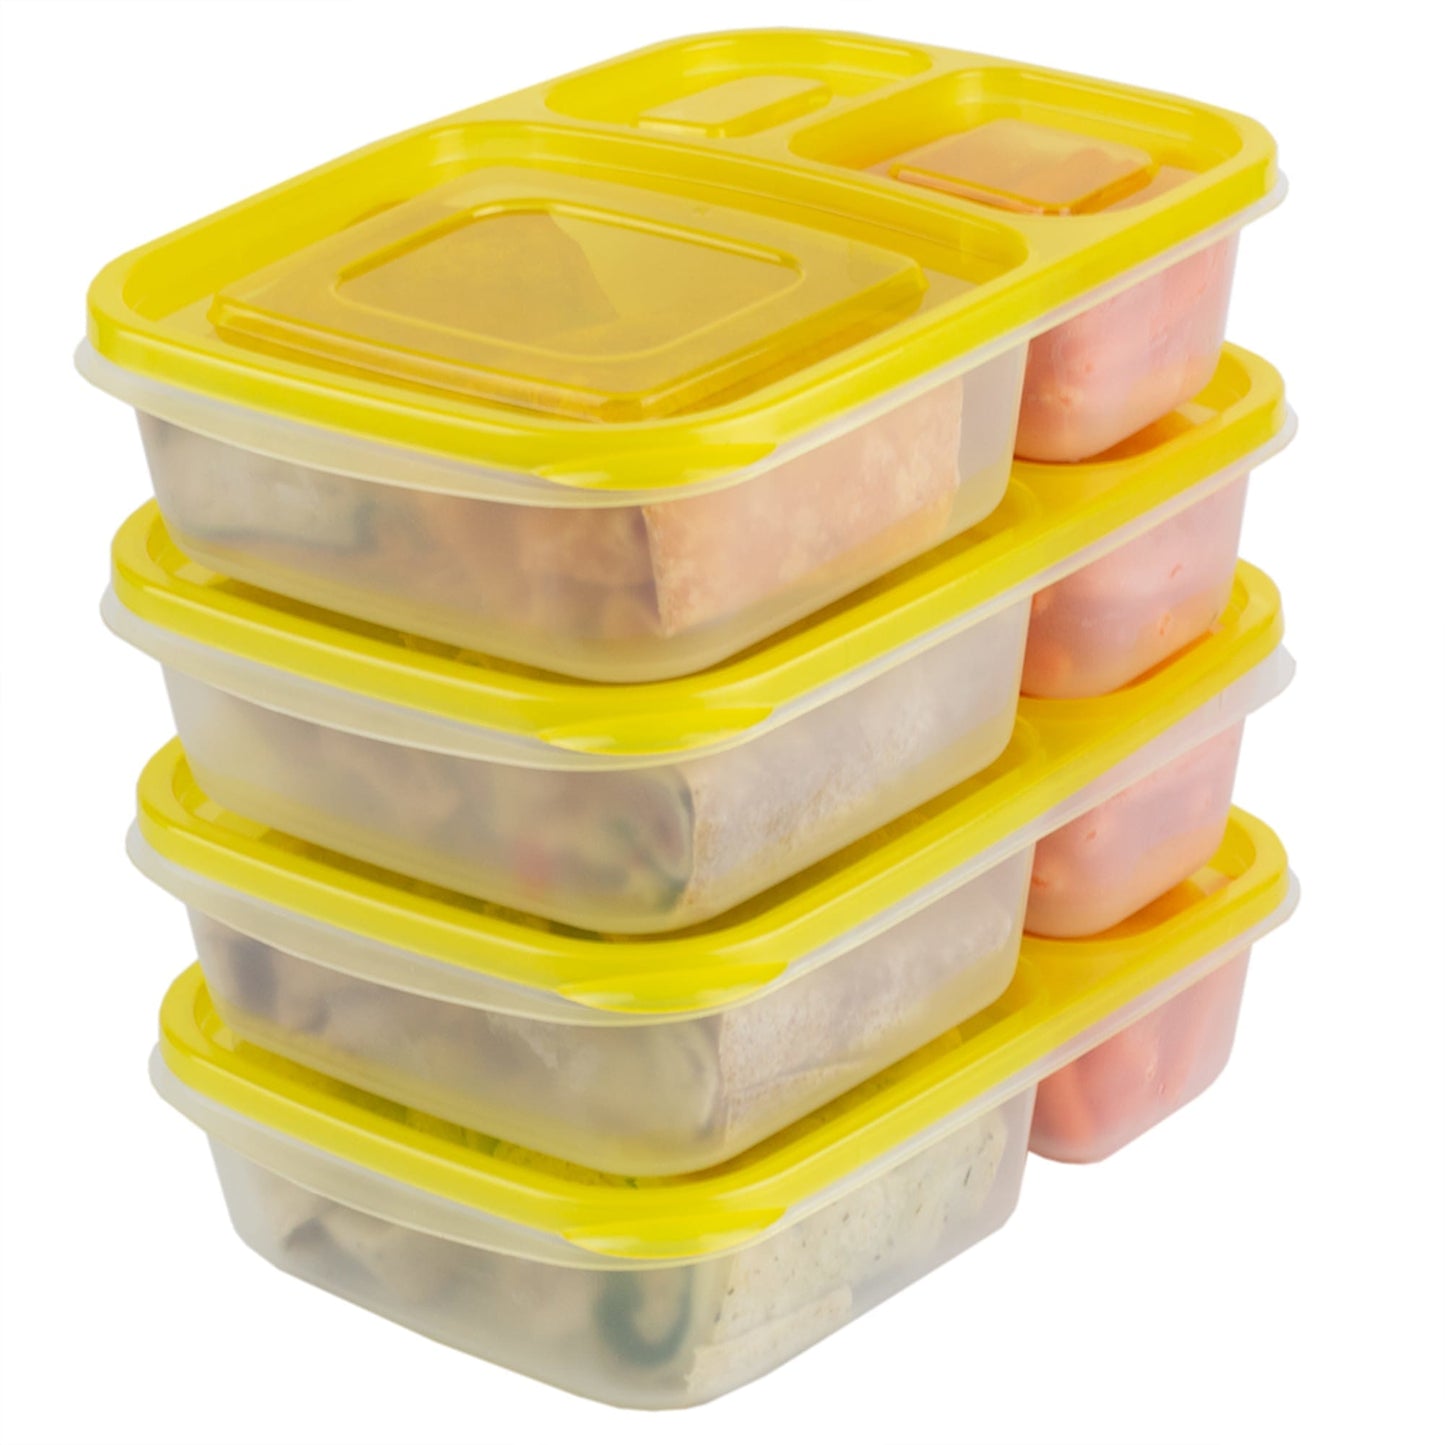 3 Section Plastic Food Storage Containers, (Set of 4), Yellow